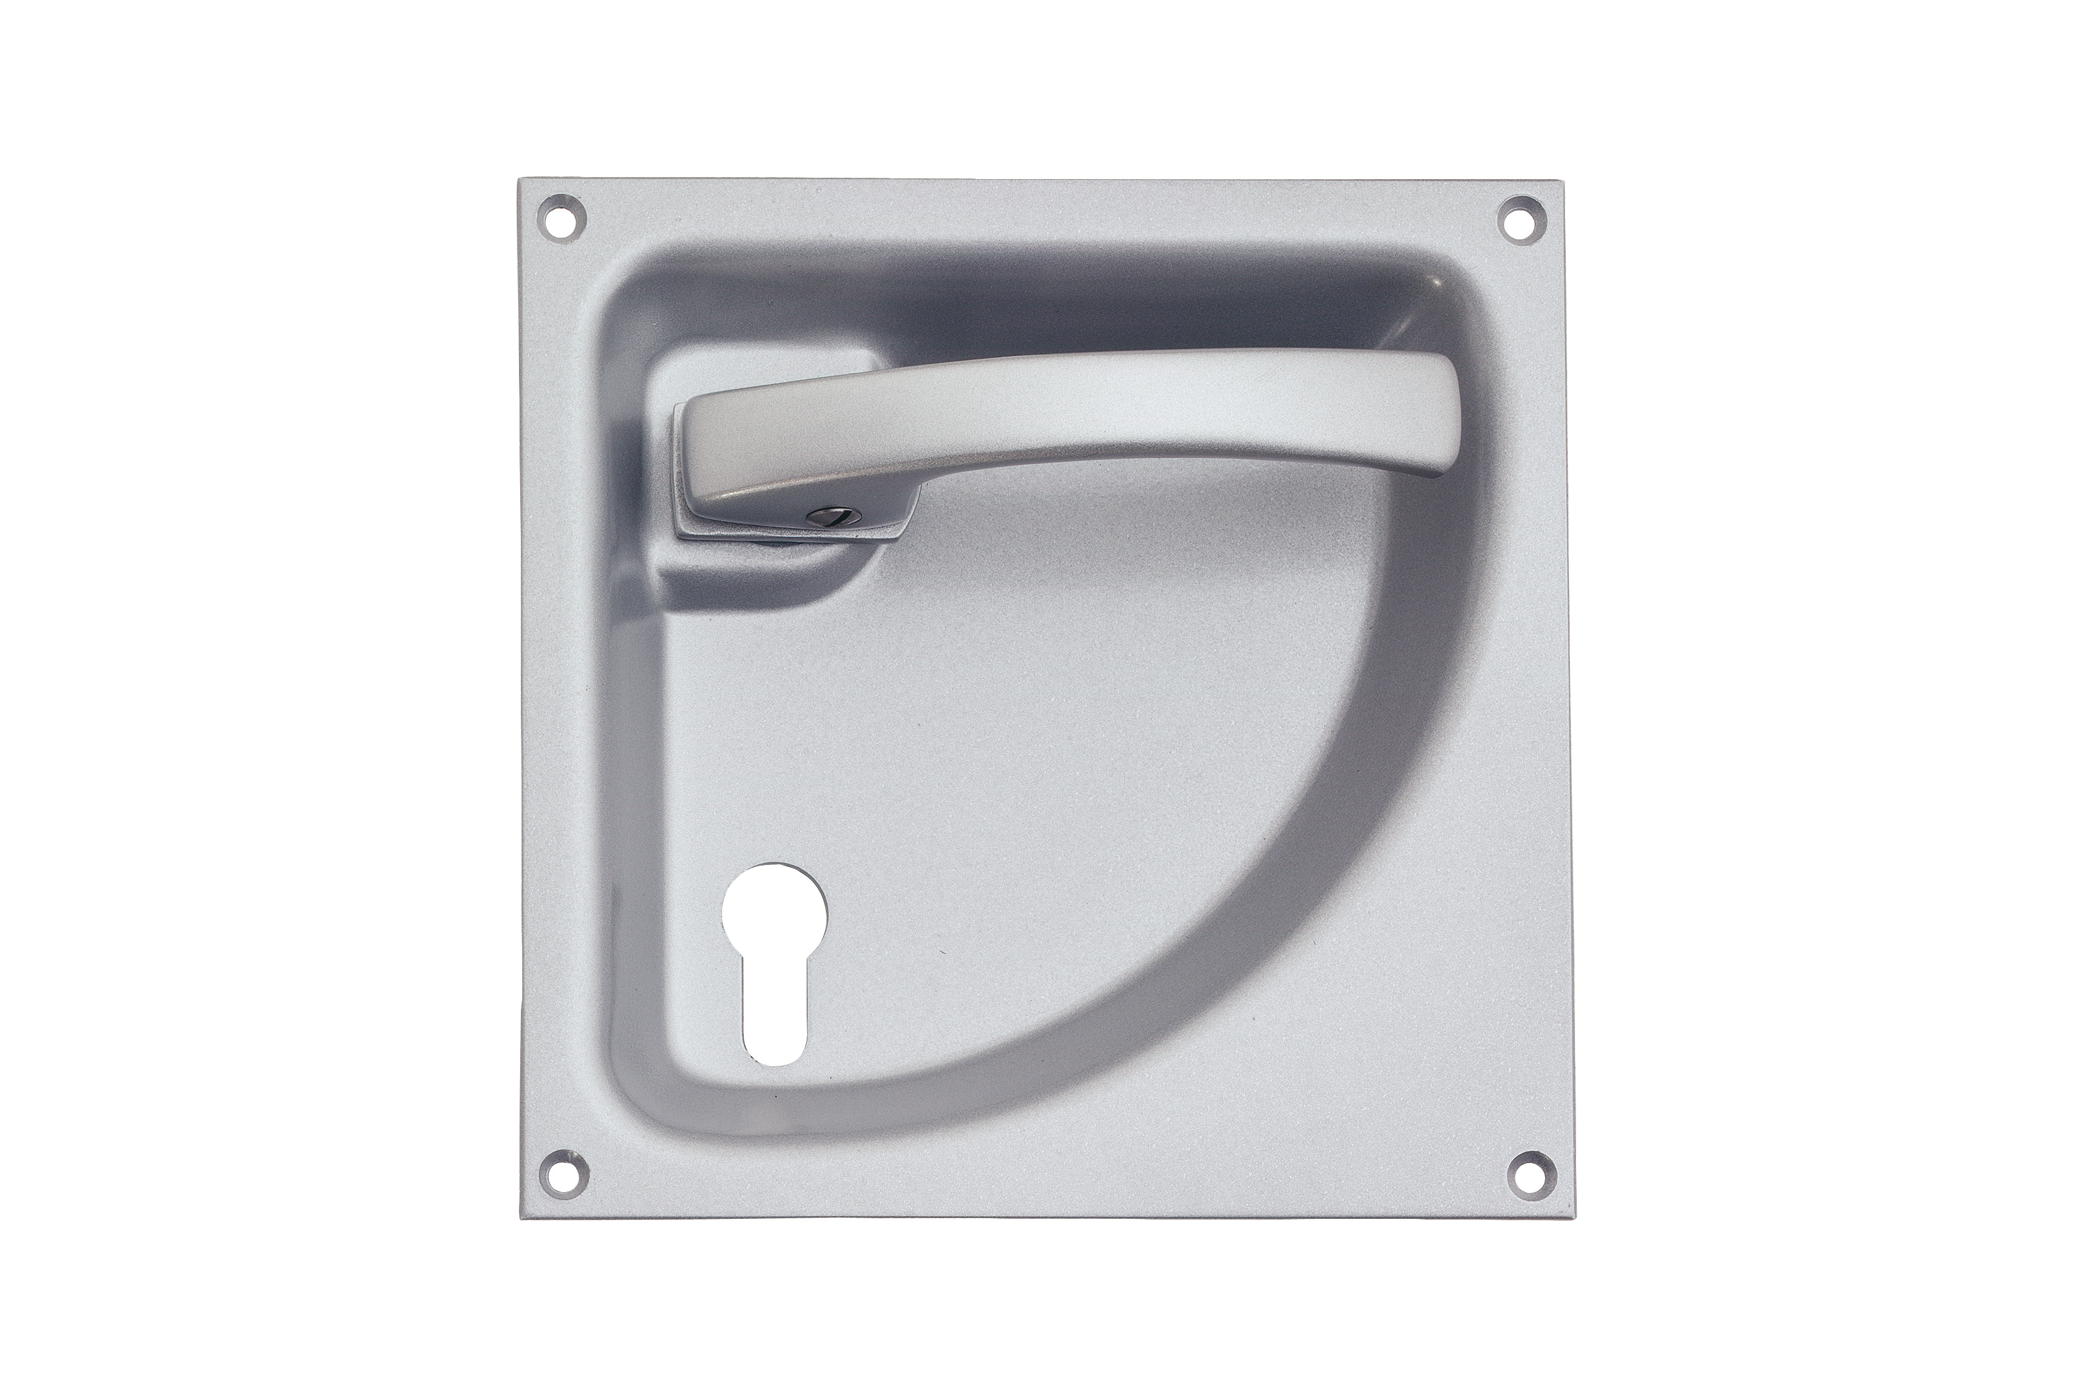 KWS Flush handle 5061 in finish 02 (steel/aluminium, silver stove-enamelled) for right-opening door with 72 mm PZ keyway